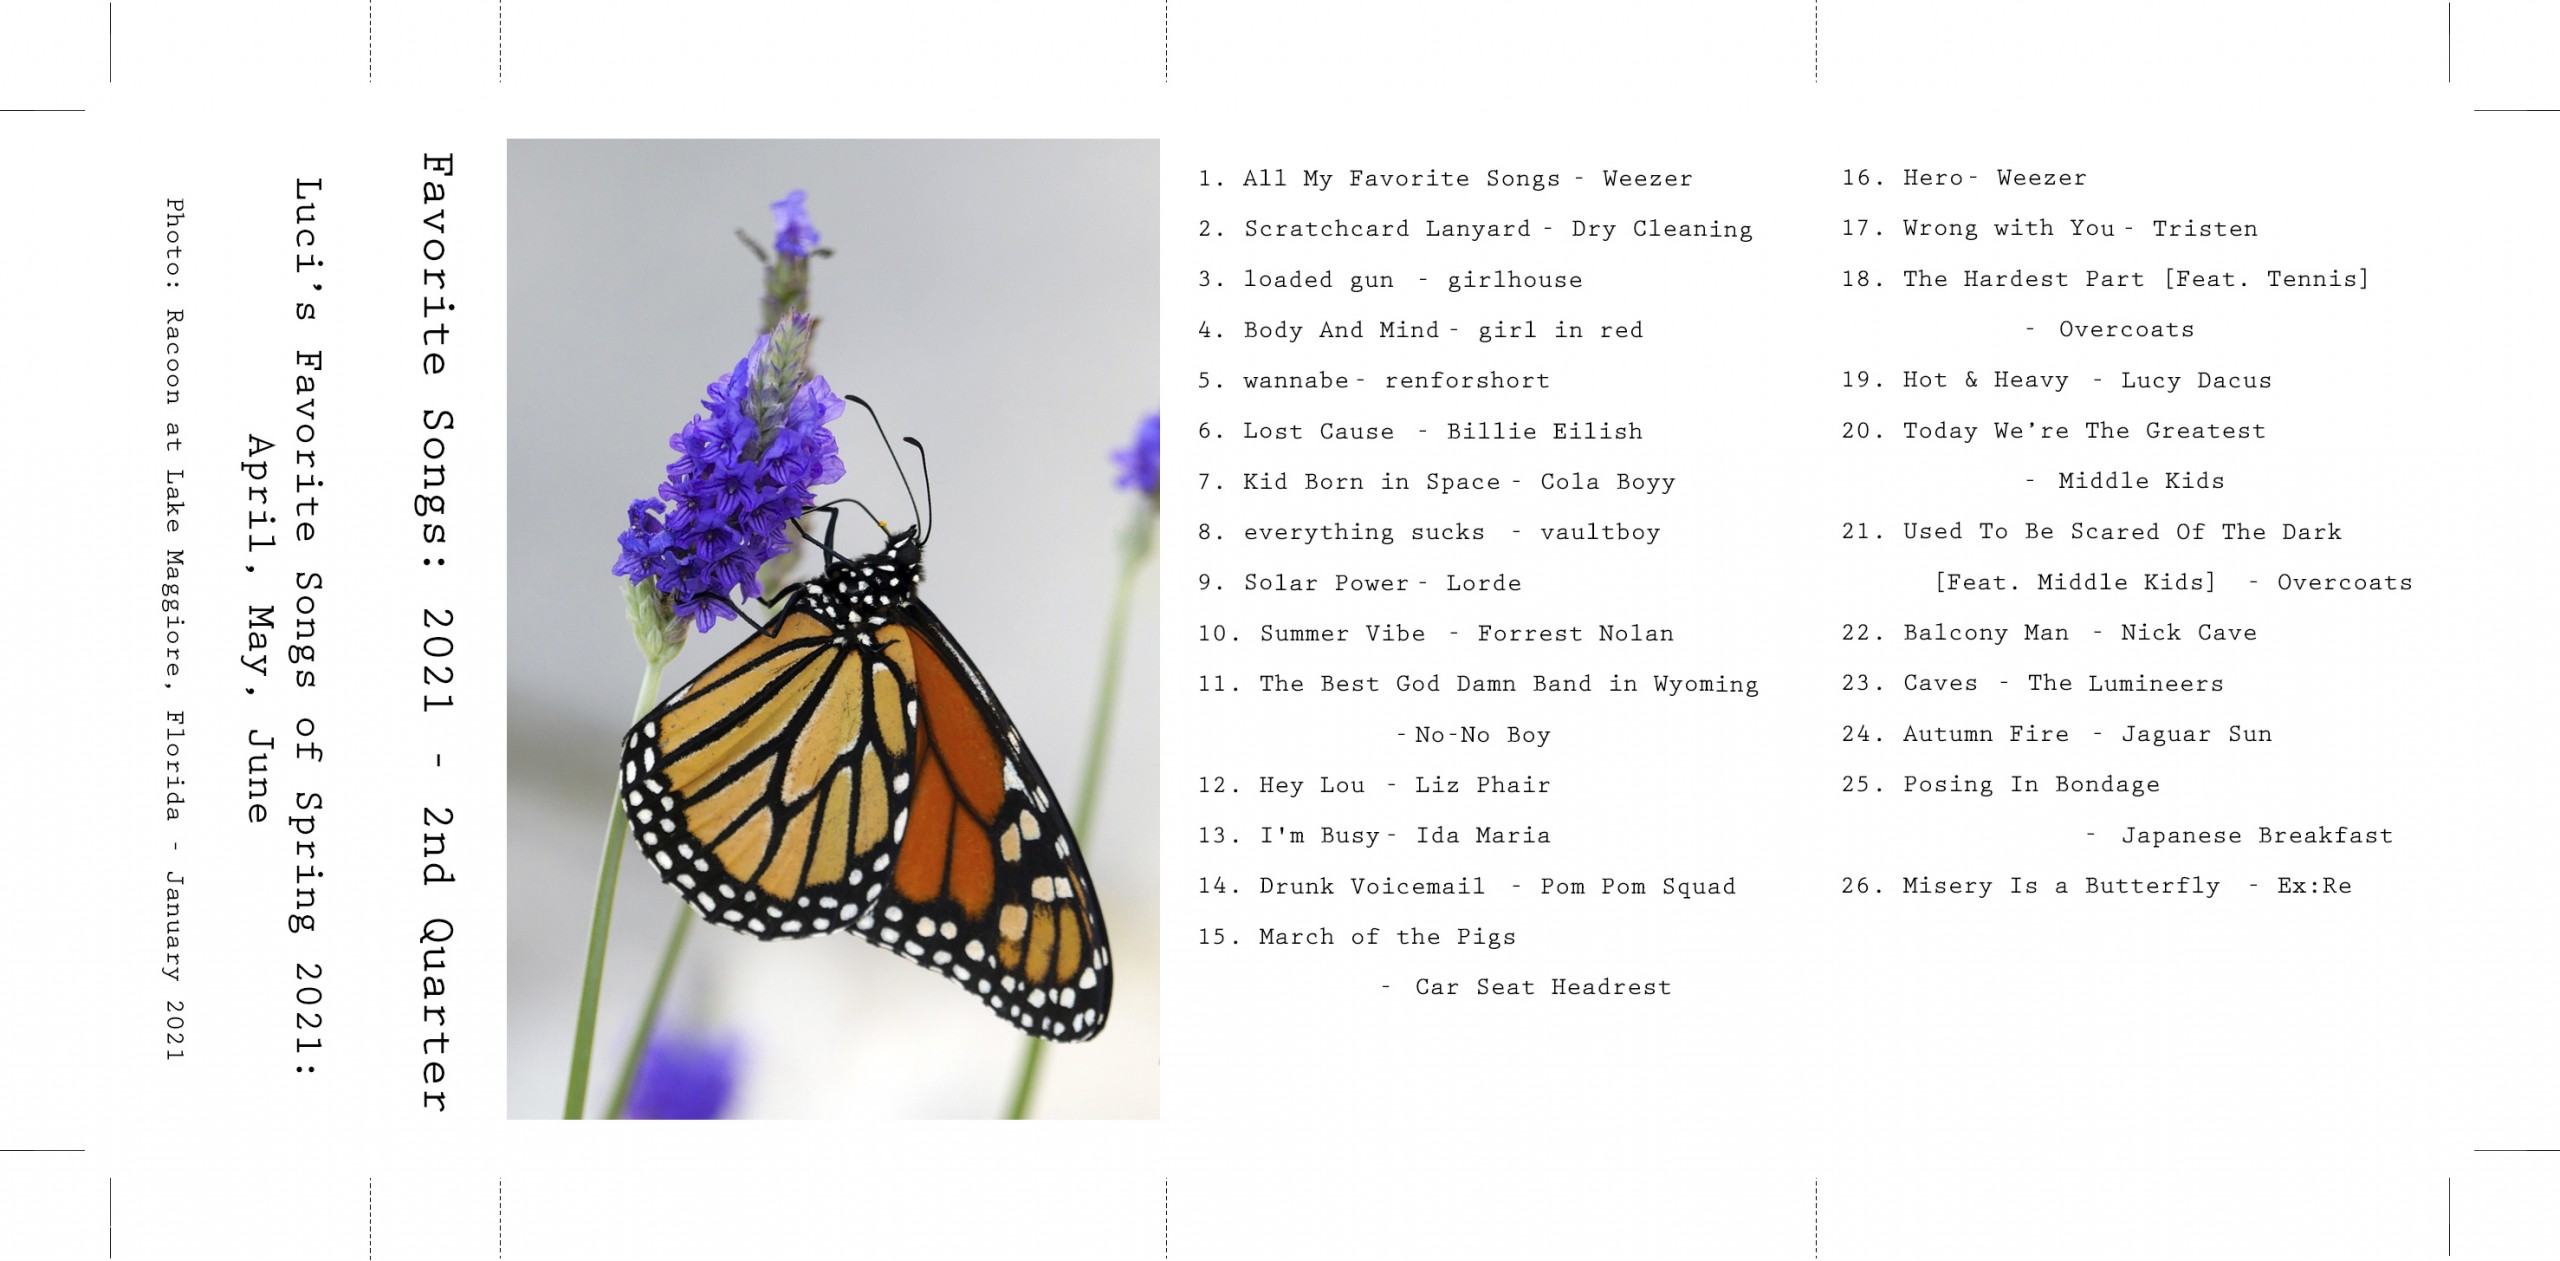 Favorite Songs of 2nd Quarter 2021, April, May, June, monarch butterfly, Luci Westphal